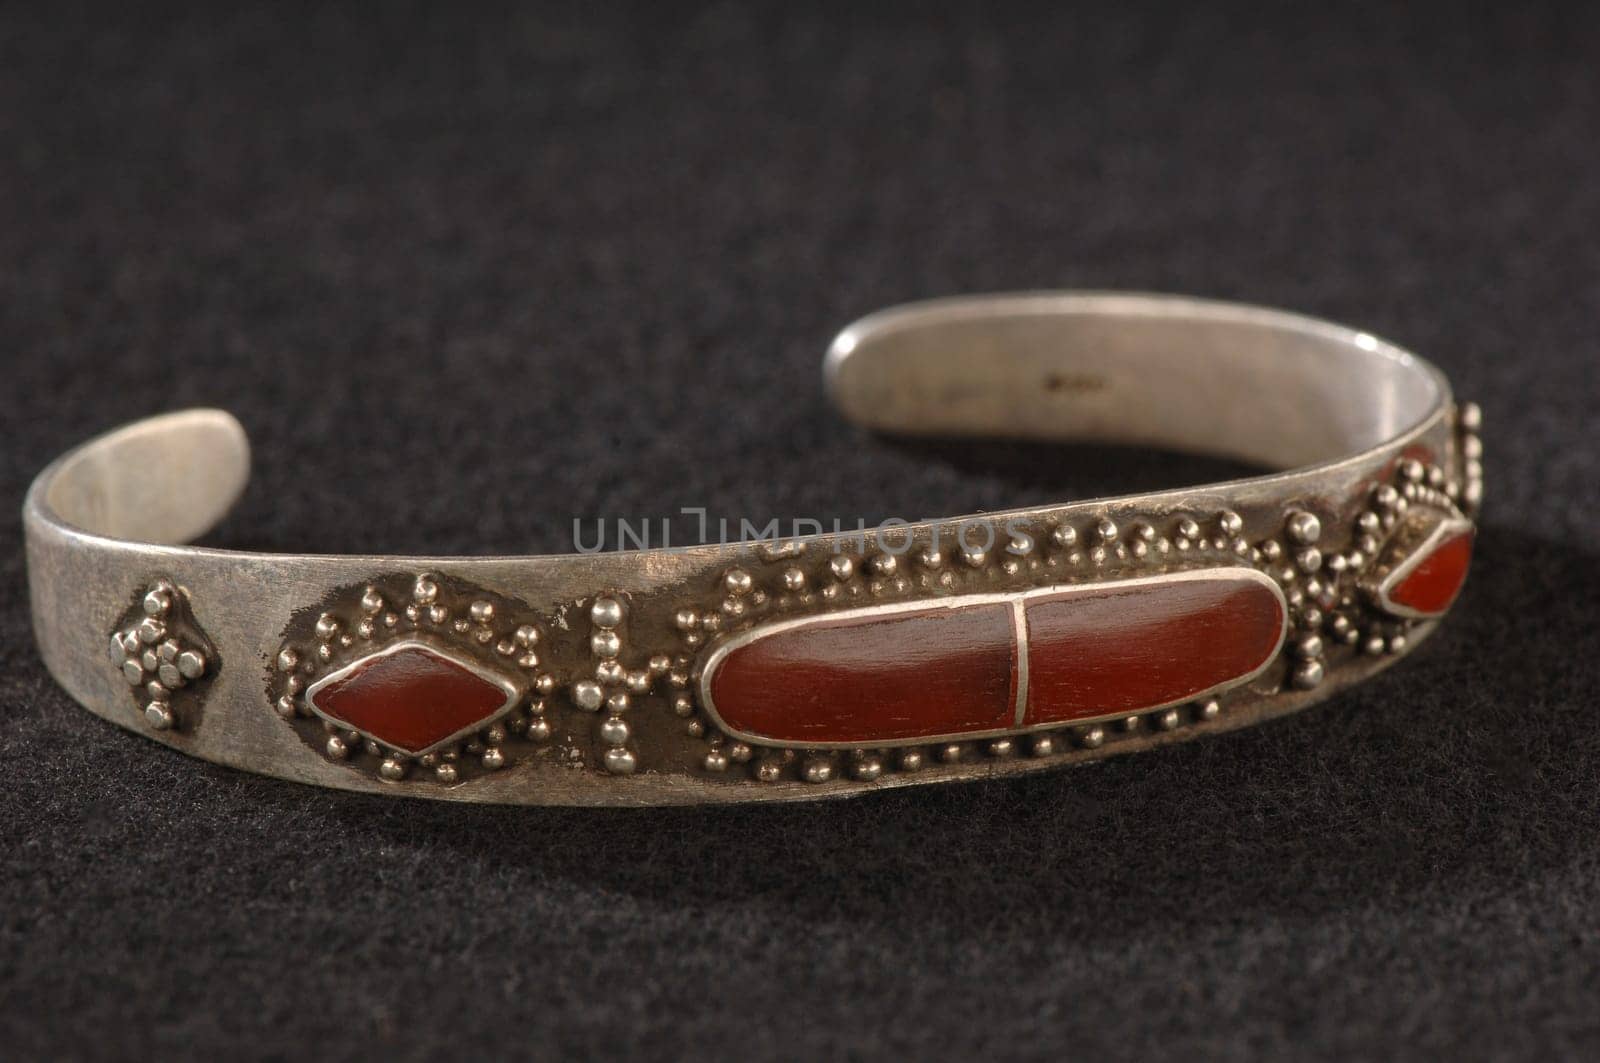 An antique, elegant bracelet with engraving and precious red stones isolated on a black background by A_Karim